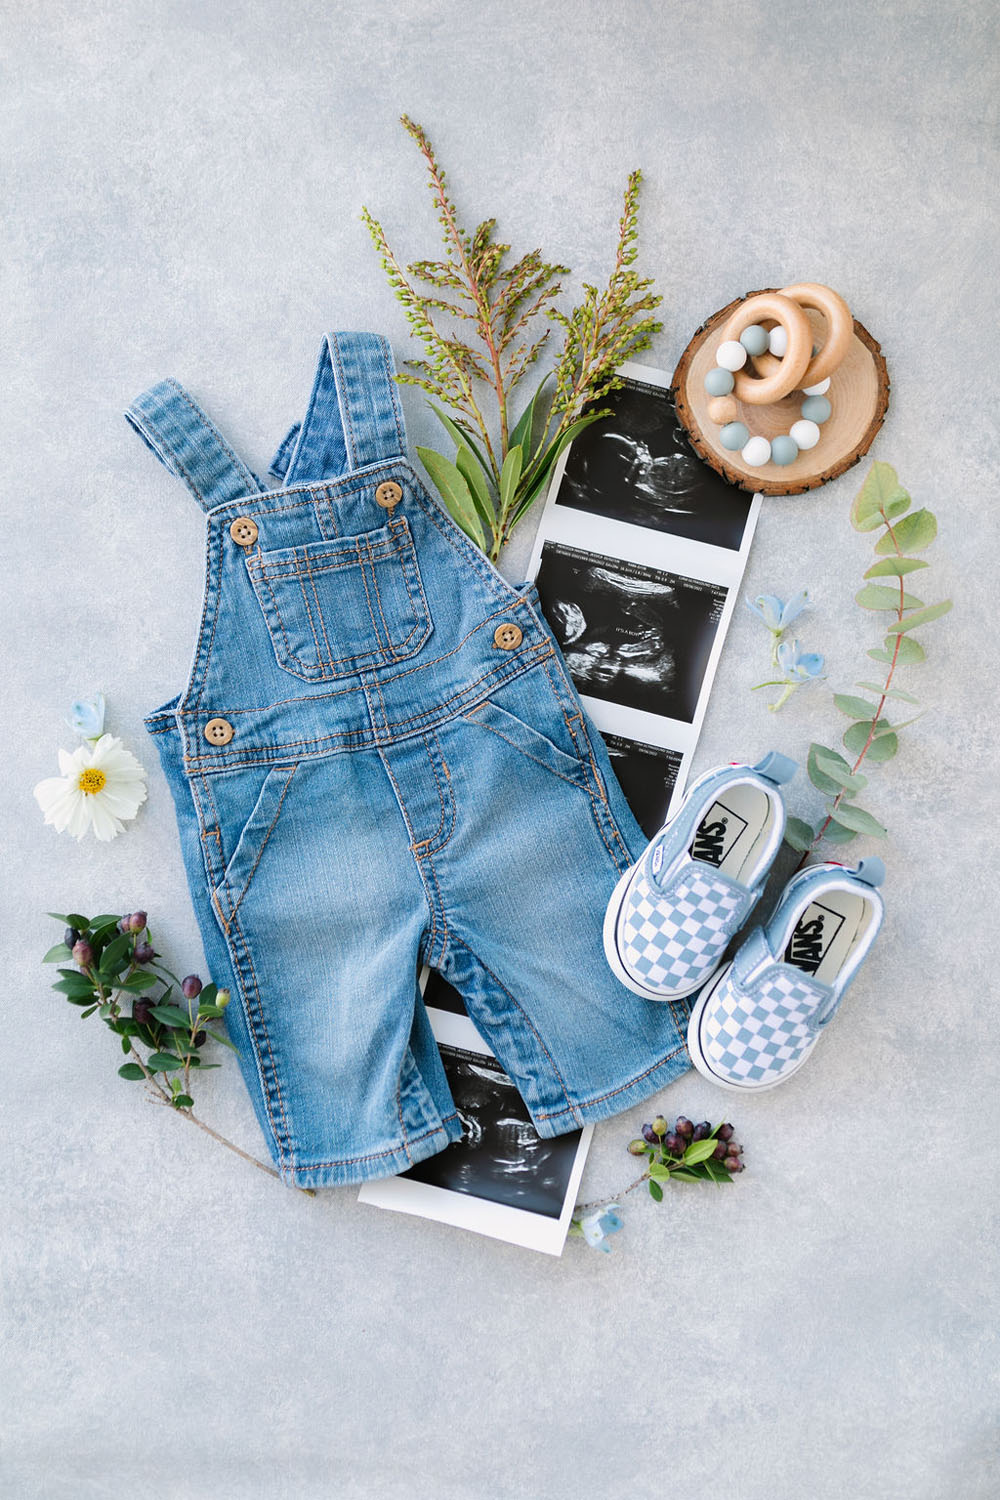 Winnie The Pooh Baby Shower: The Ultimate Guide - Another Mommy Blogger